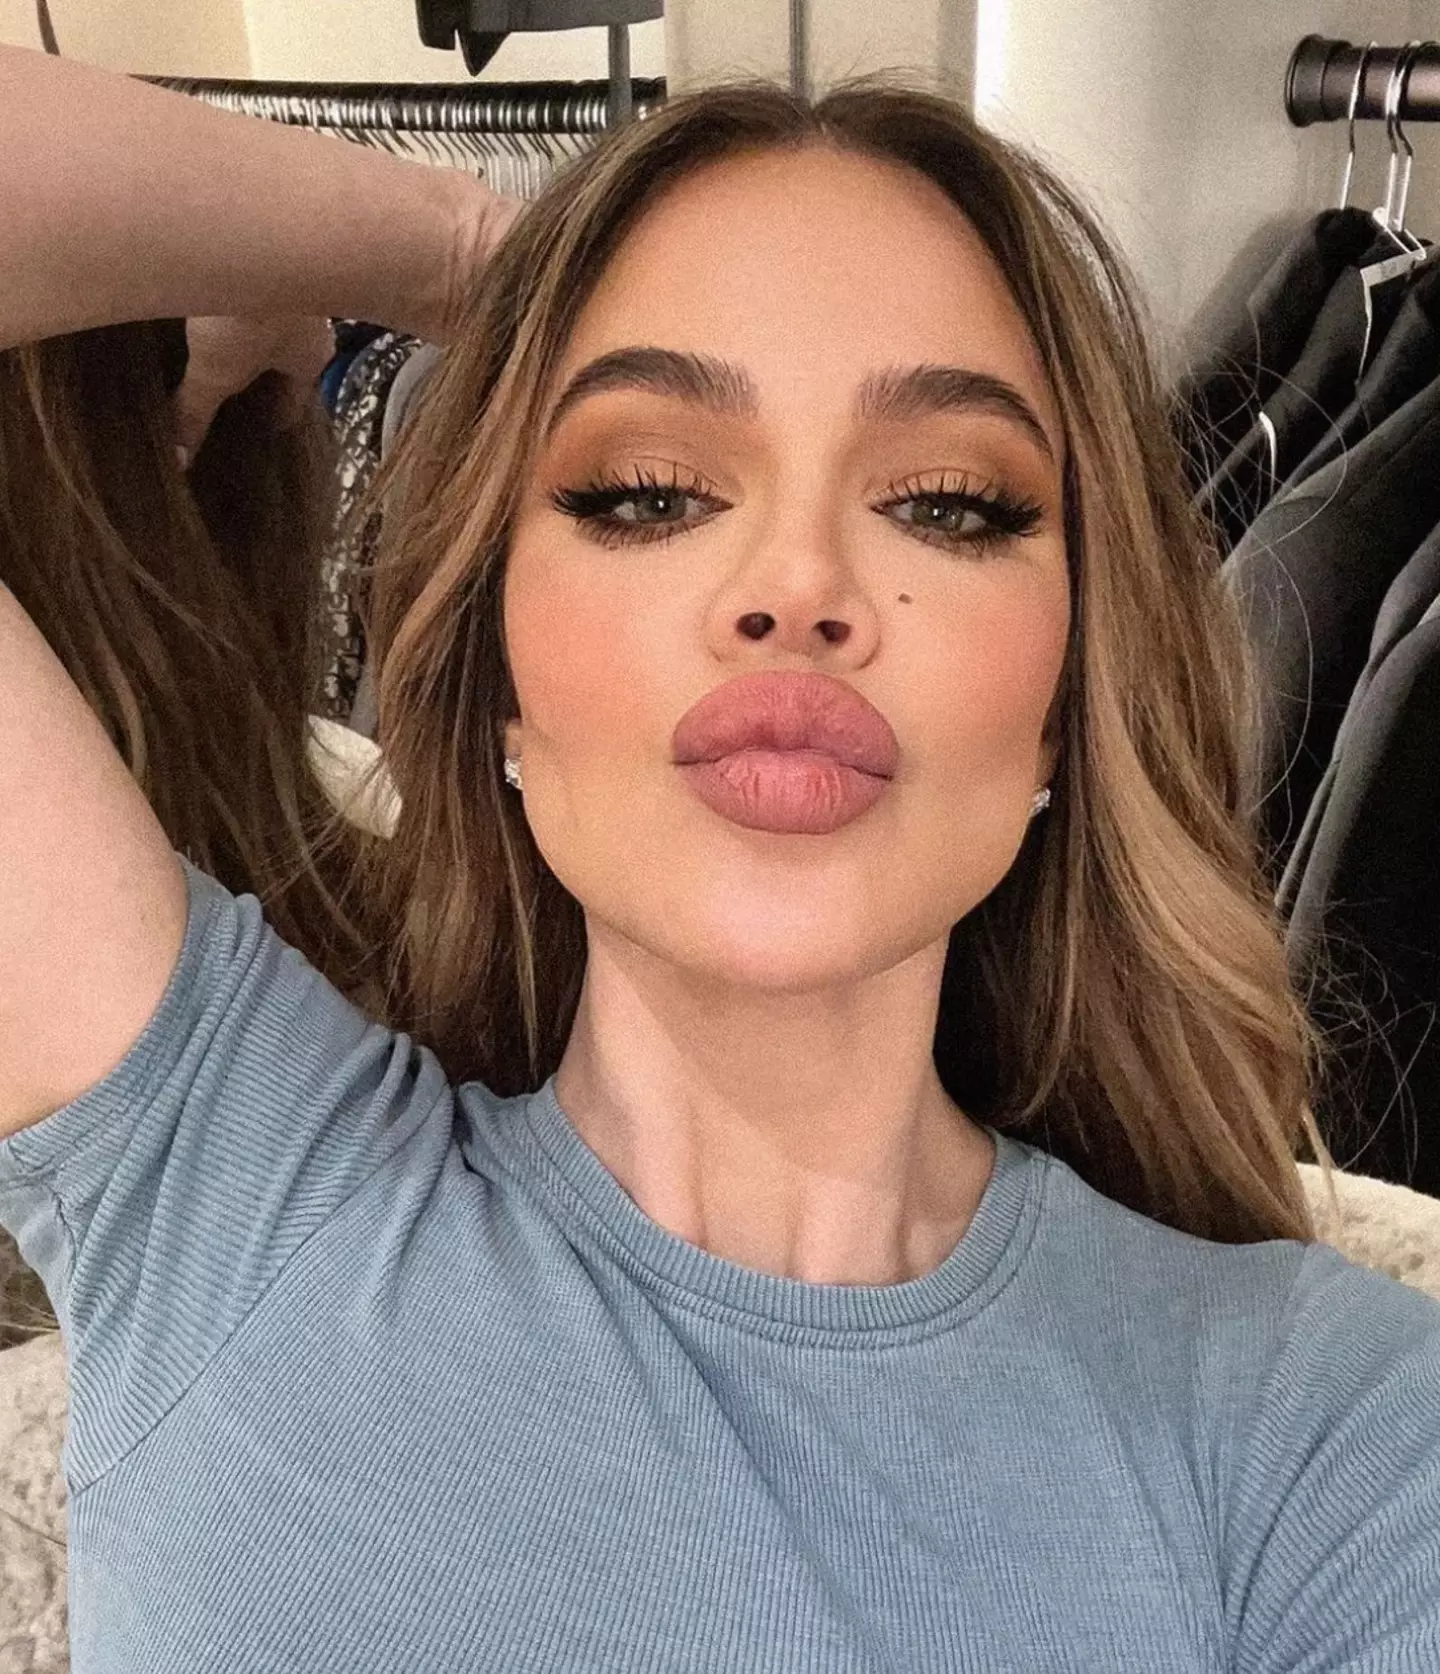 Khloe Kardashian, among many other high-profile celebrities and influencers, is often accused of heavily editing her photos.